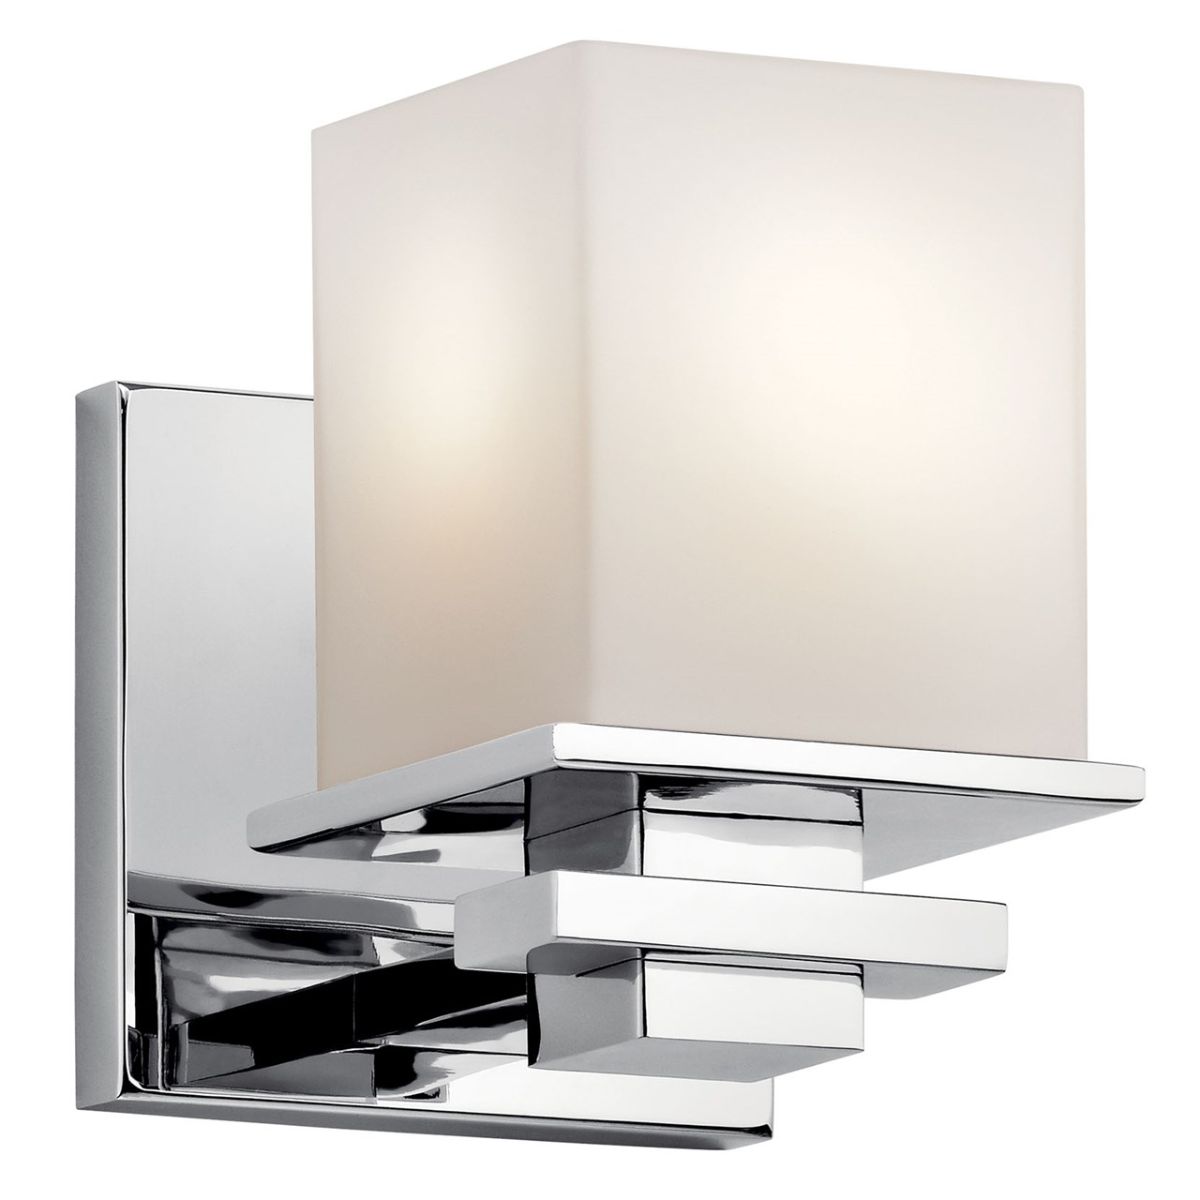 Tully 7 in. Armed Sconce Chrome Finish